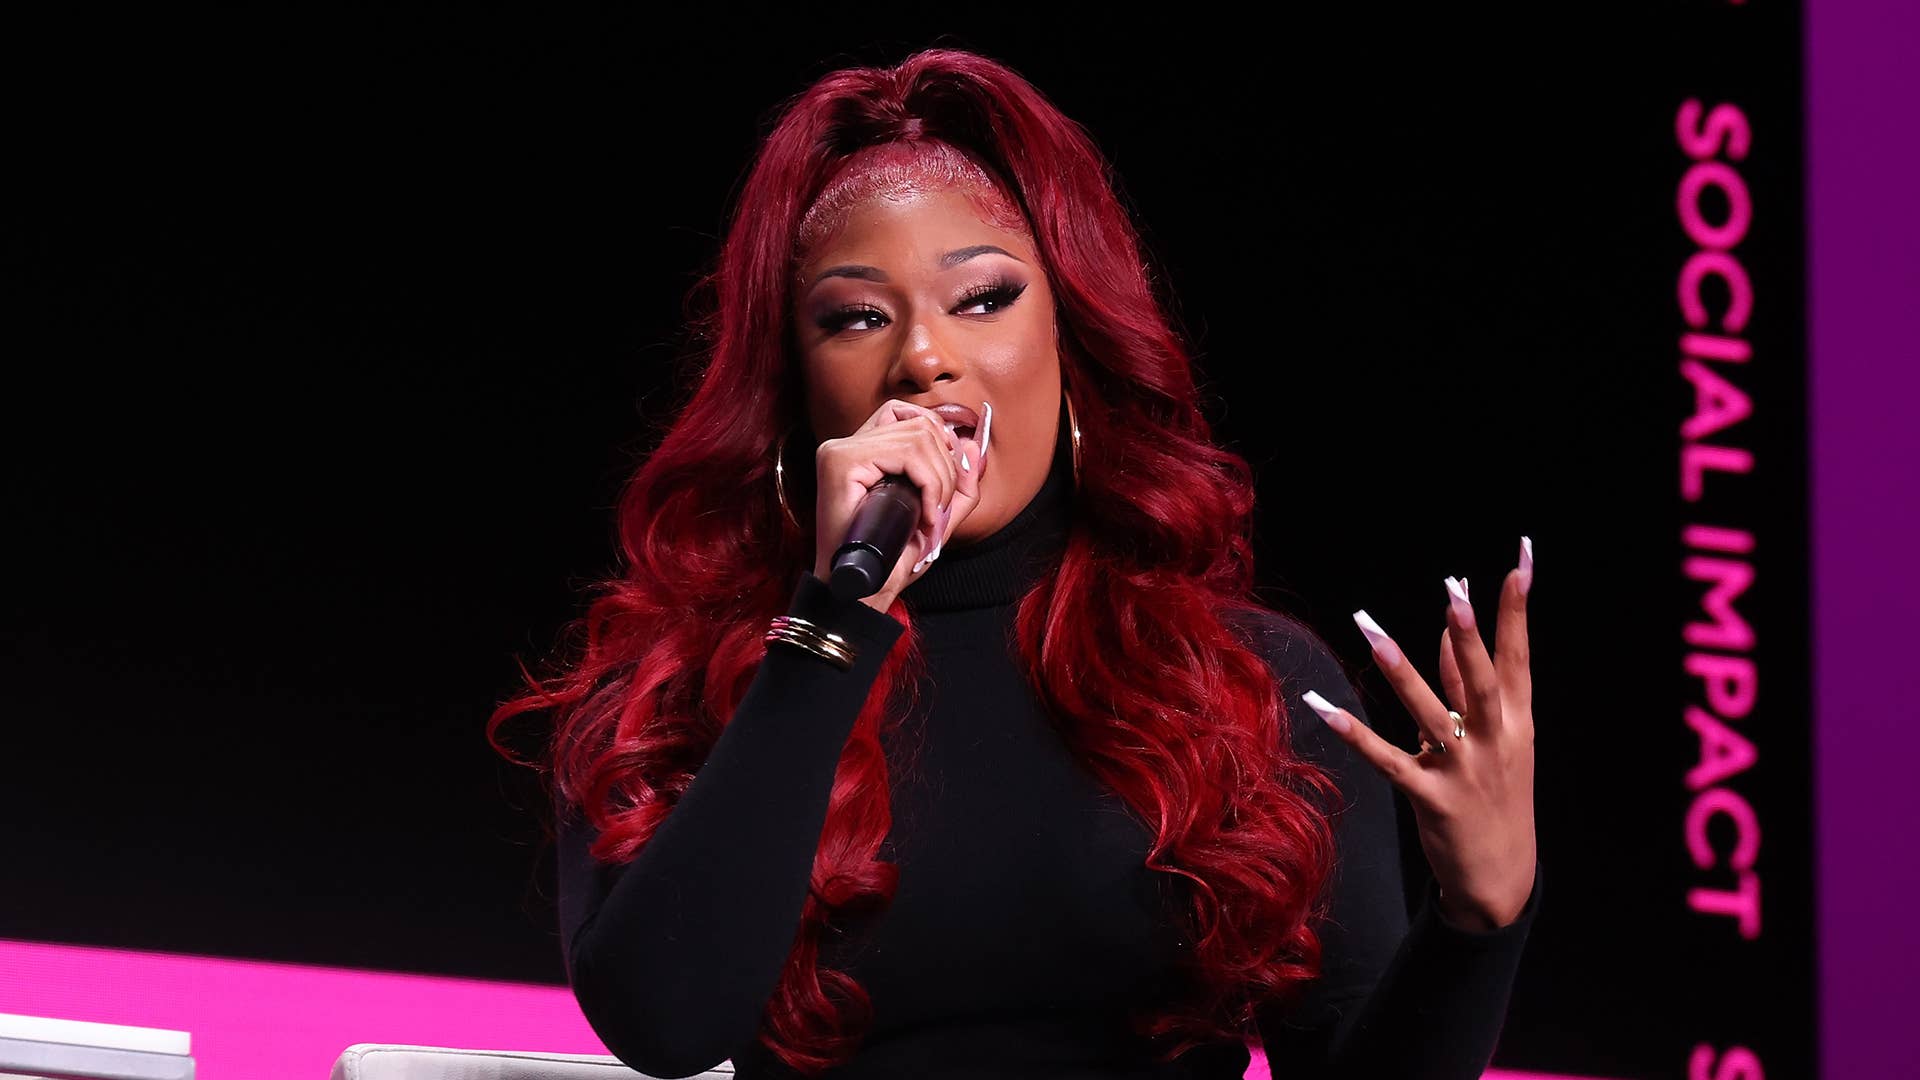 Megan Thee Stallion speaks at the 2022 Forbes 30 Under 30 Summit at Detroit Opera House